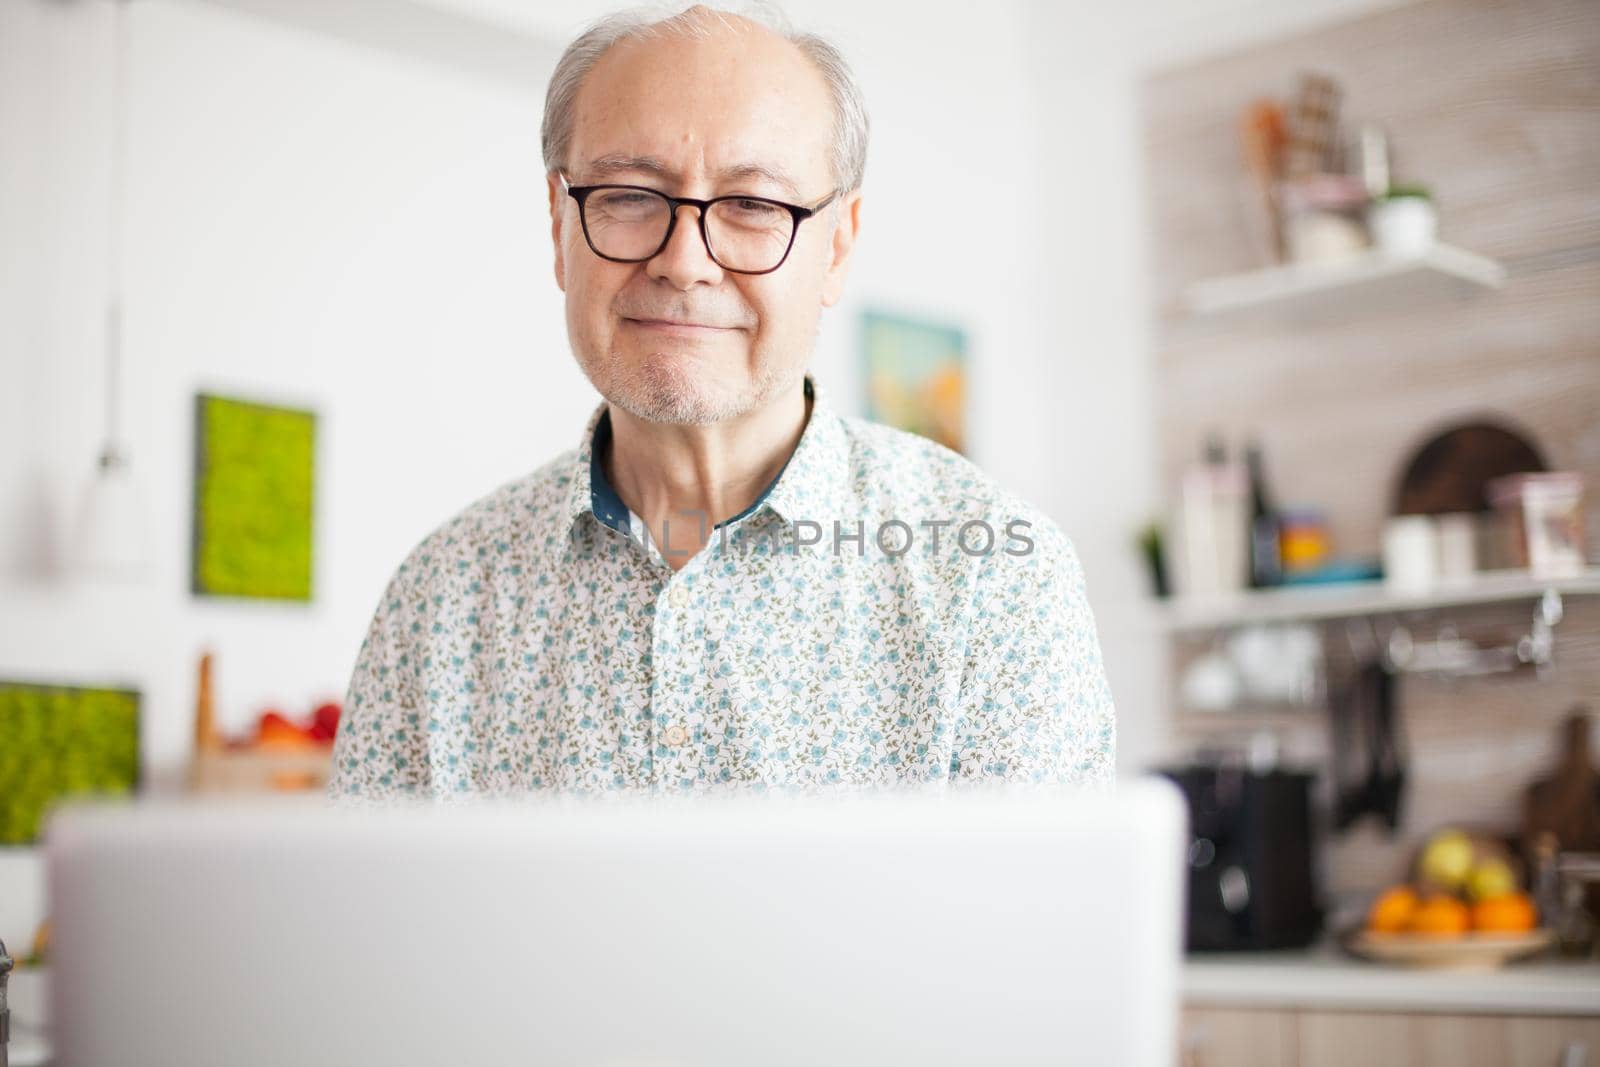 Retired man smiling while watching a movie on the laptop. Daily life of senior man in kitchen during breakfast using laptop holding a cup of coffee. Elderly retired person working from home, telecommuting using remote internet job online communication.